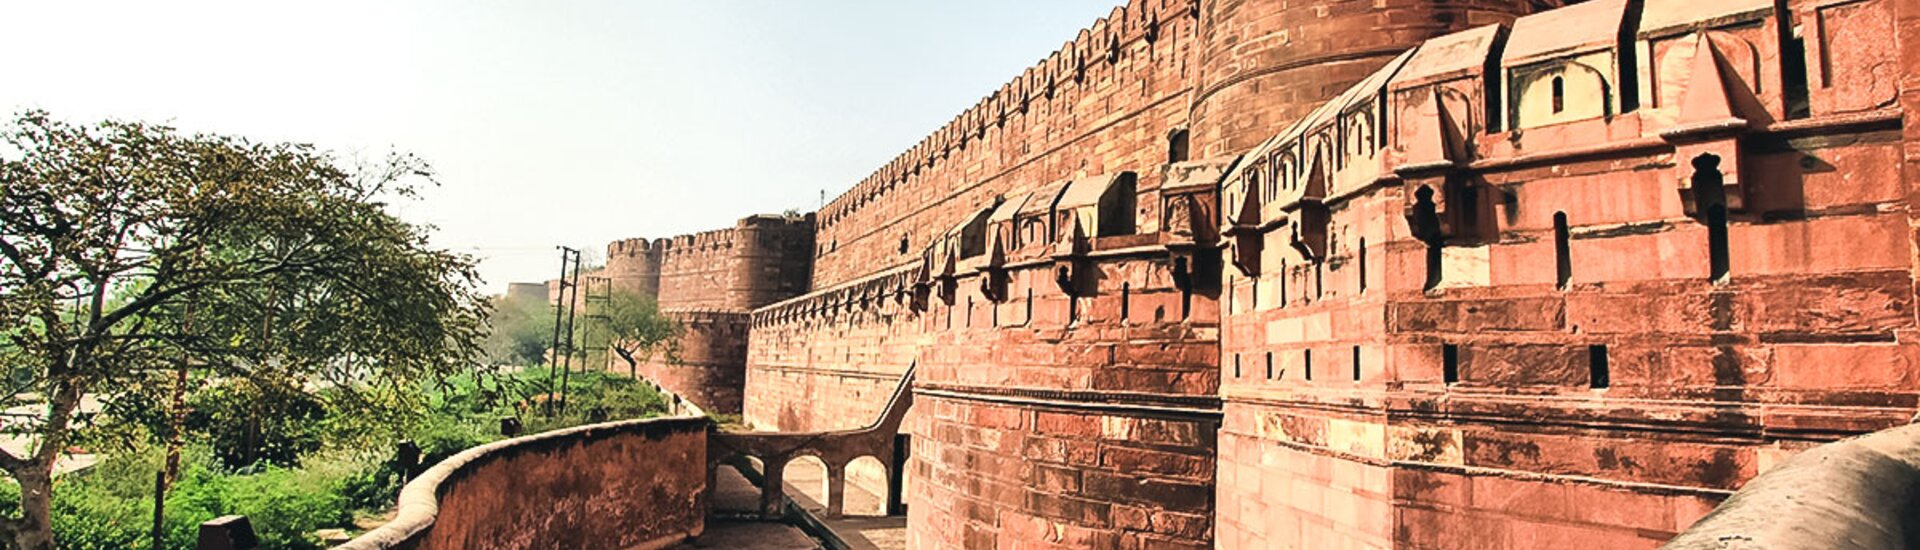 Das Rote Fort in Agra